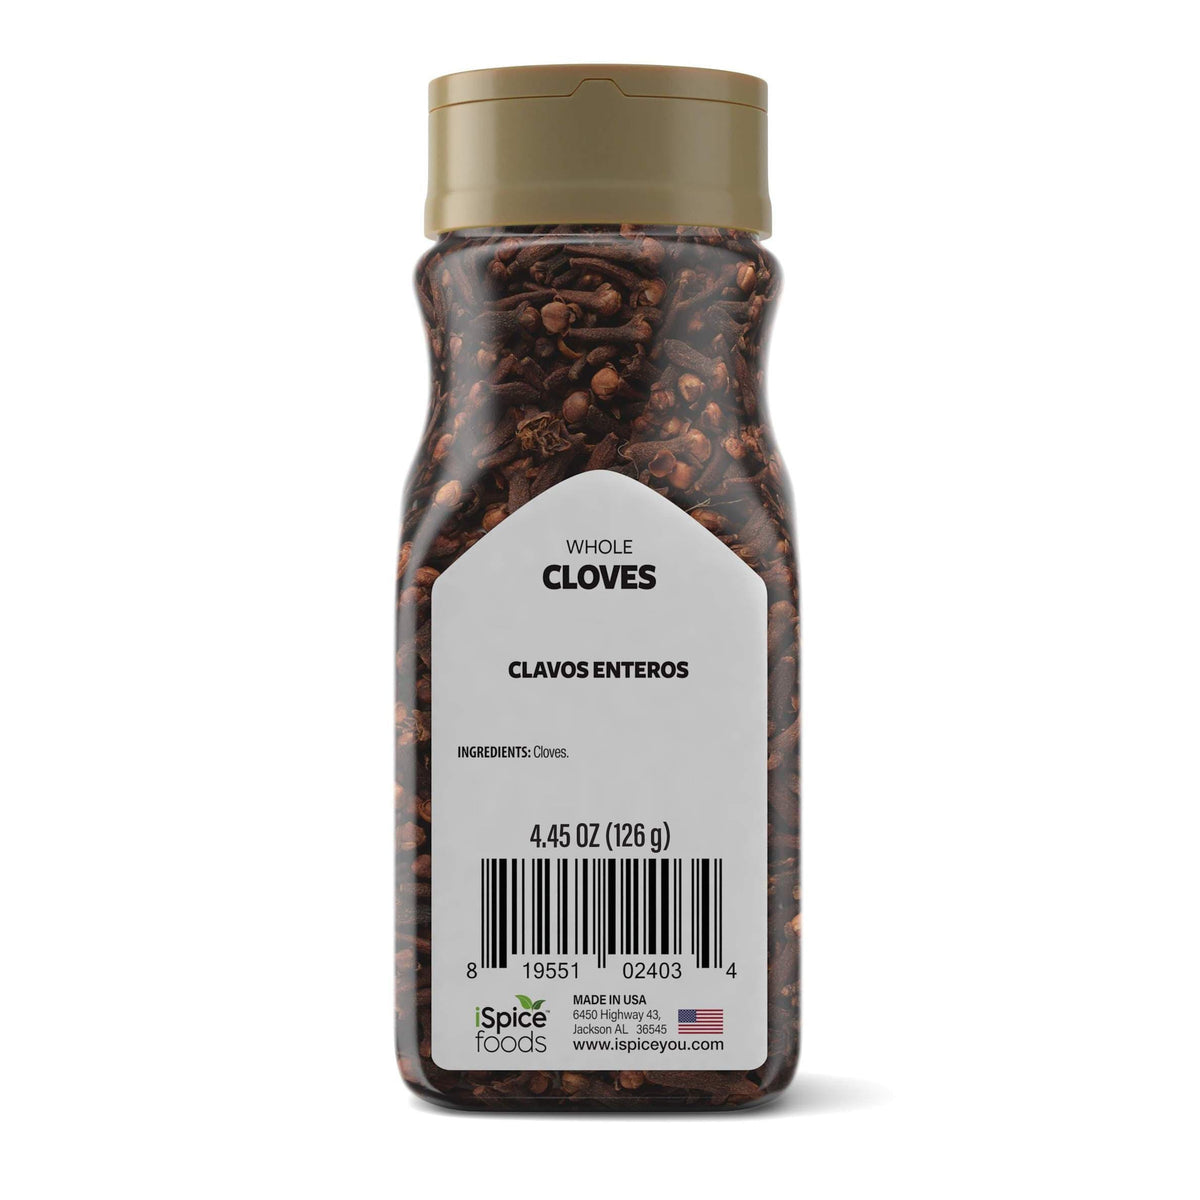 What are the Health Benefits of Eating Whole Cloves?